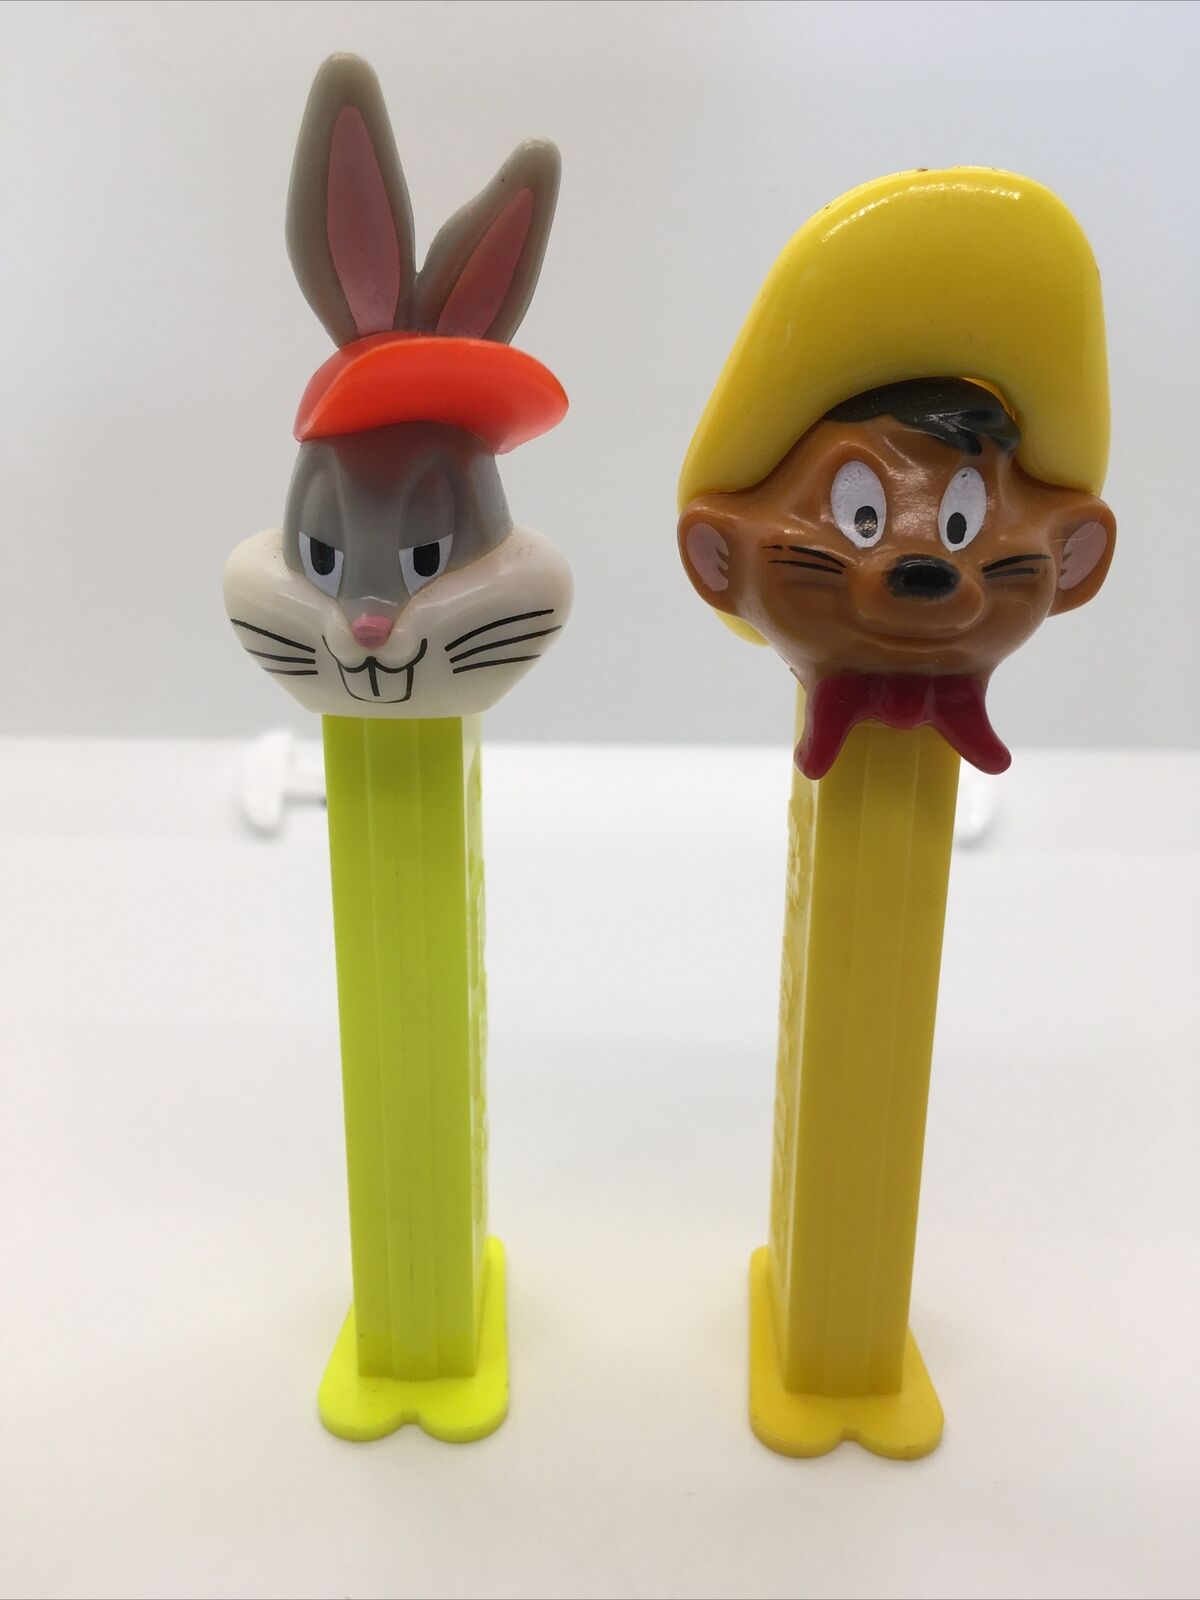 Two Vintage Pez Dispensers-speedy Gonzales And Bugs Bunny